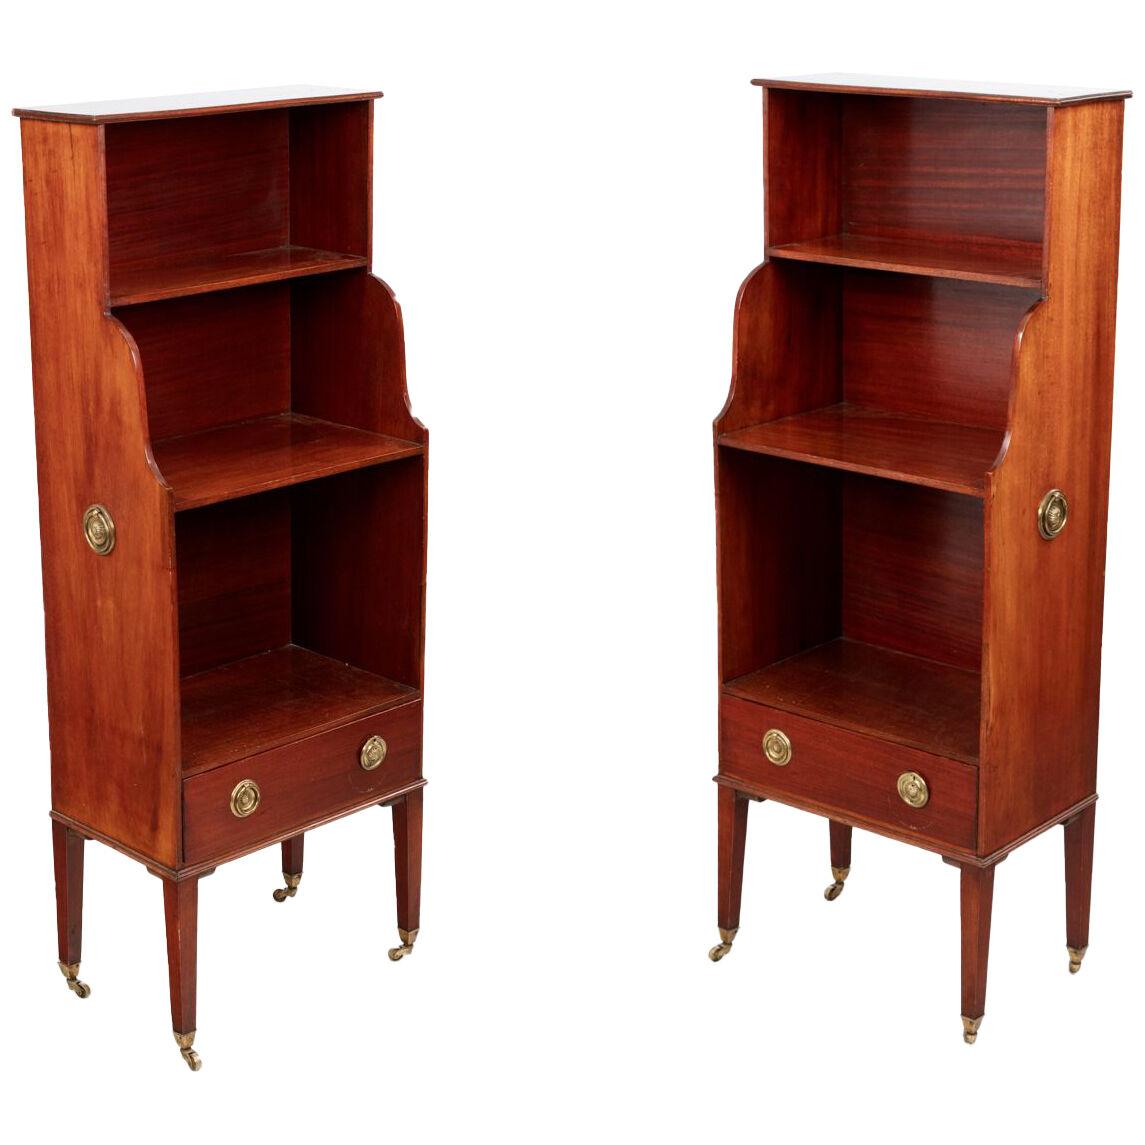 Pair of Miniature Waterfall Bookcases